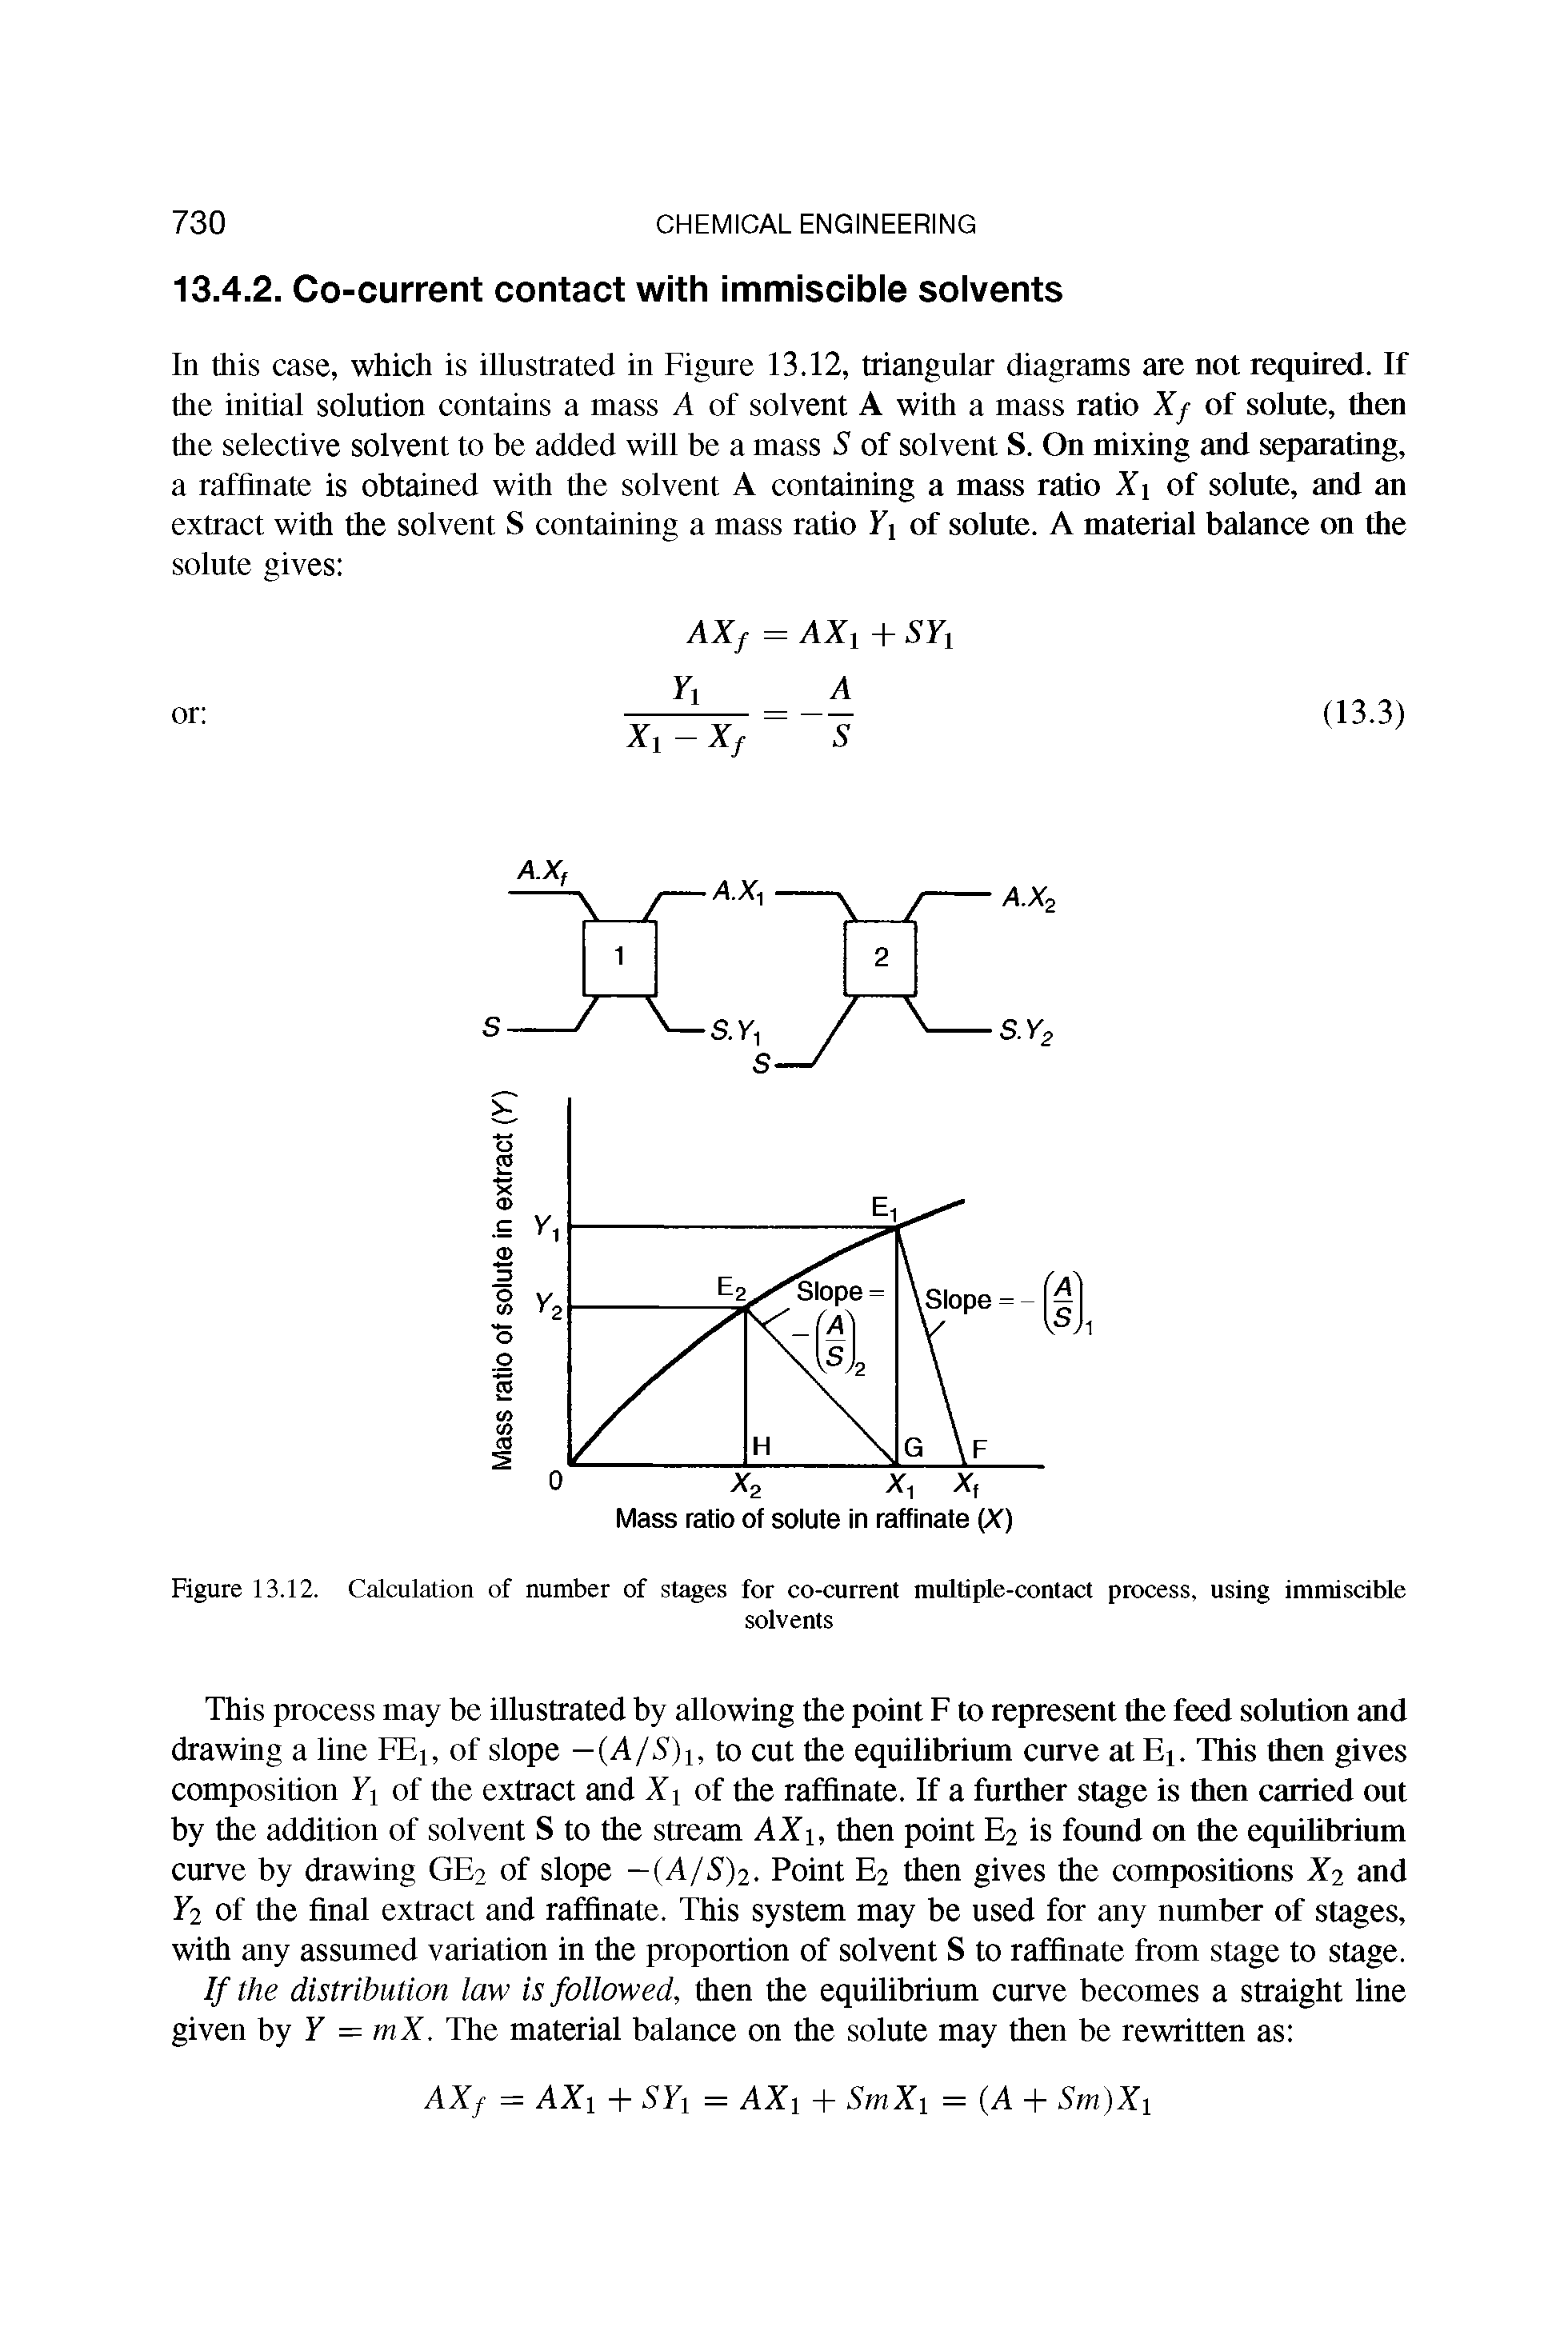 Figure 13.12. Calculation of number of stages for co-current multiple-contact process, using immiscible...